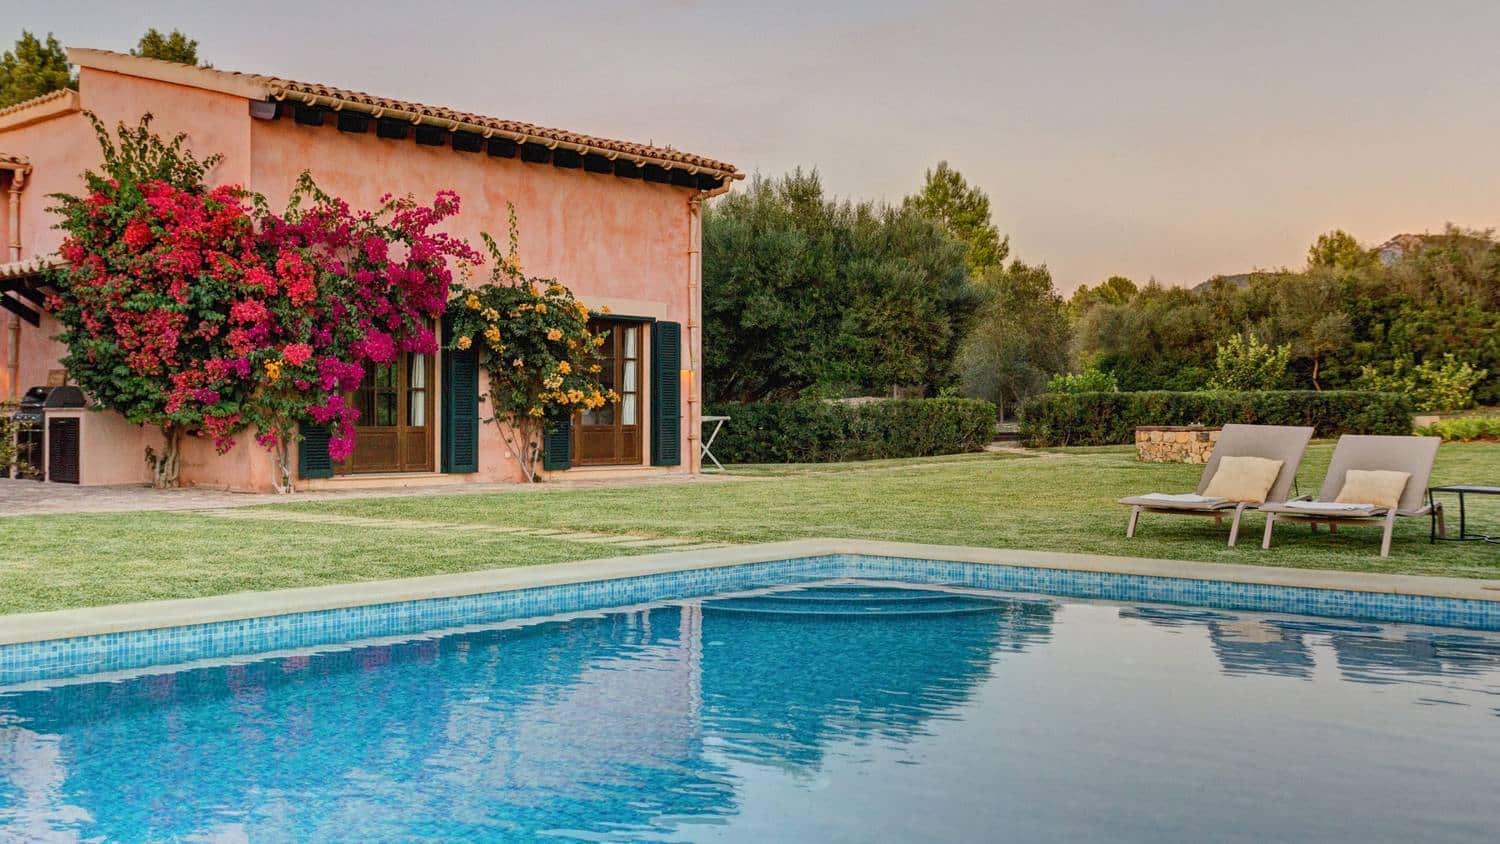 MAGNIFICENT LUXURY ESTATE WITH STABLES AND GUEST HOUSE IN CALVIA